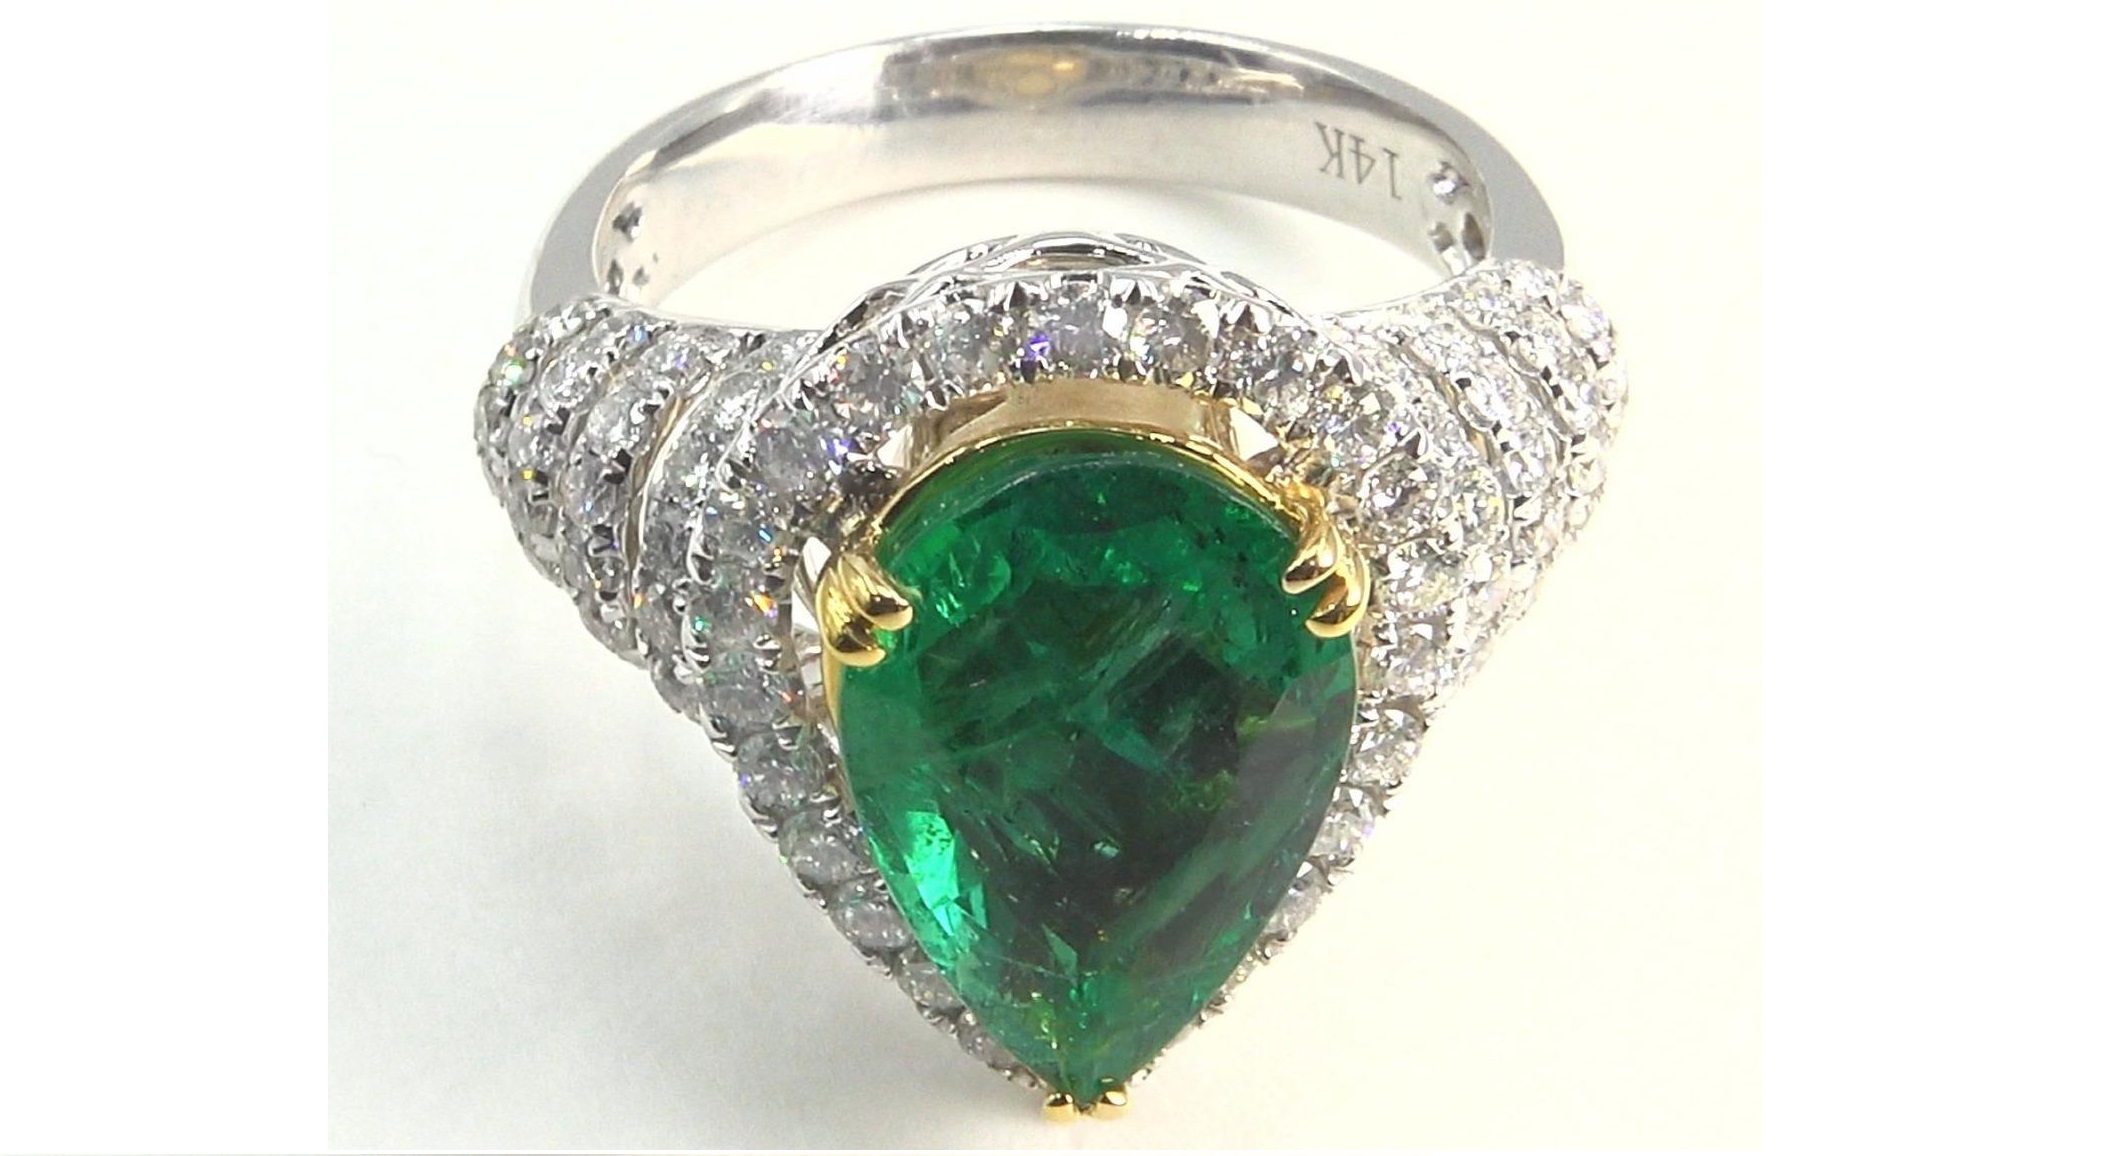 Natural Green Emerald Diamond Engagement Ring 14k Gold 4.86 TCW GIA Certified 